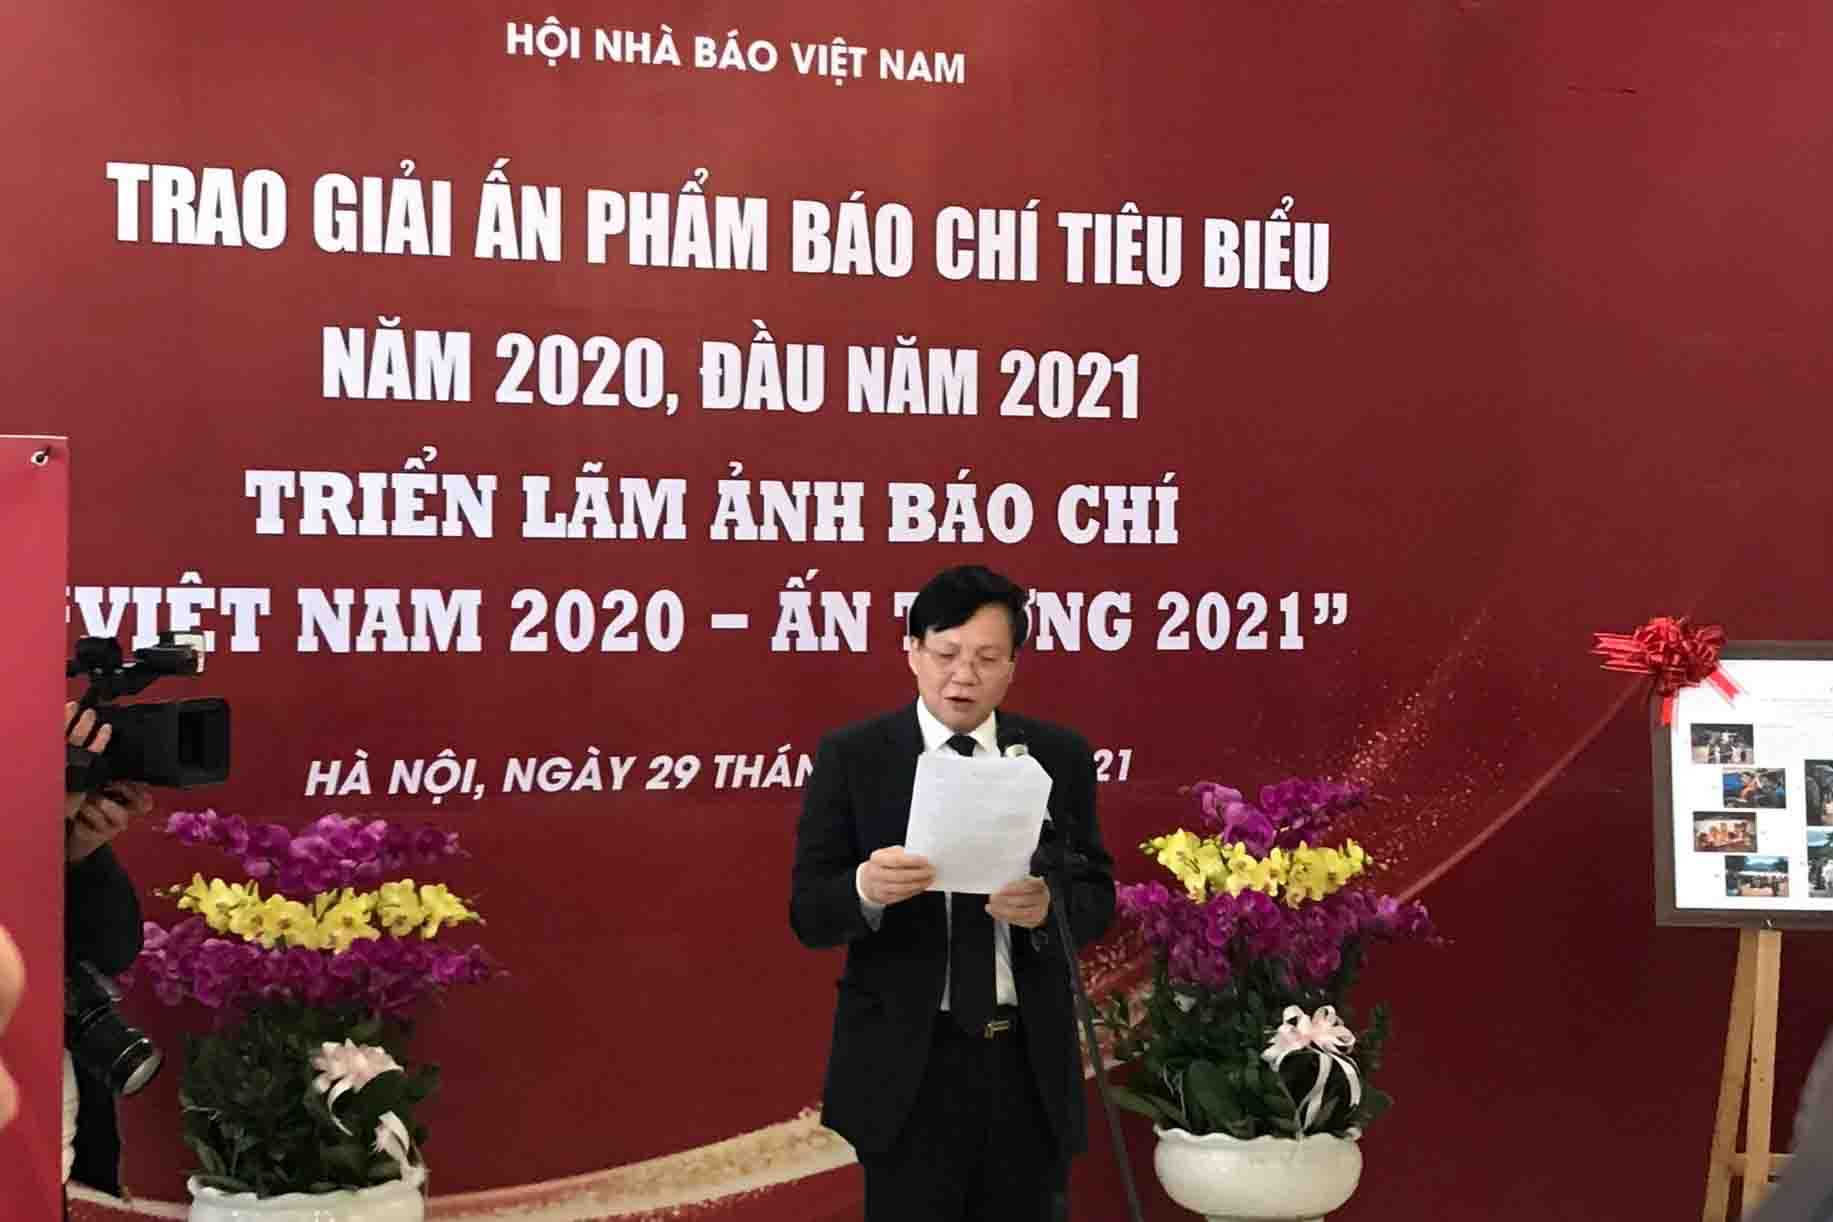 Journalist Ho Quang Loi, Permanent Vice-Chairman of Vietnam Journalists’ Association, giving a speech at the ceremony. Photo: My Hau